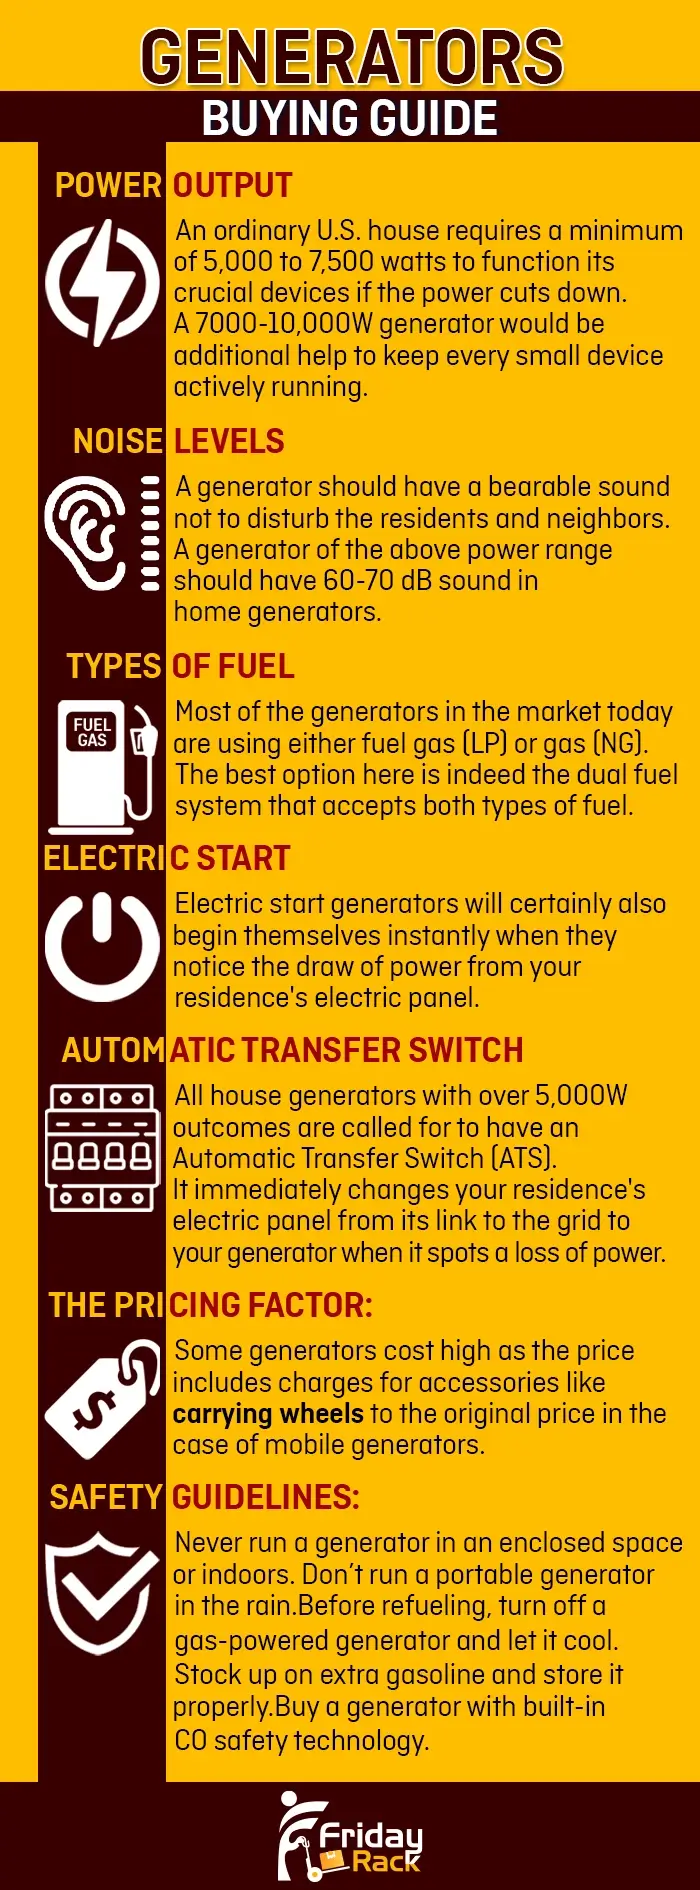 Buying Guide for the best home generators. Things to consider while buying generator for home